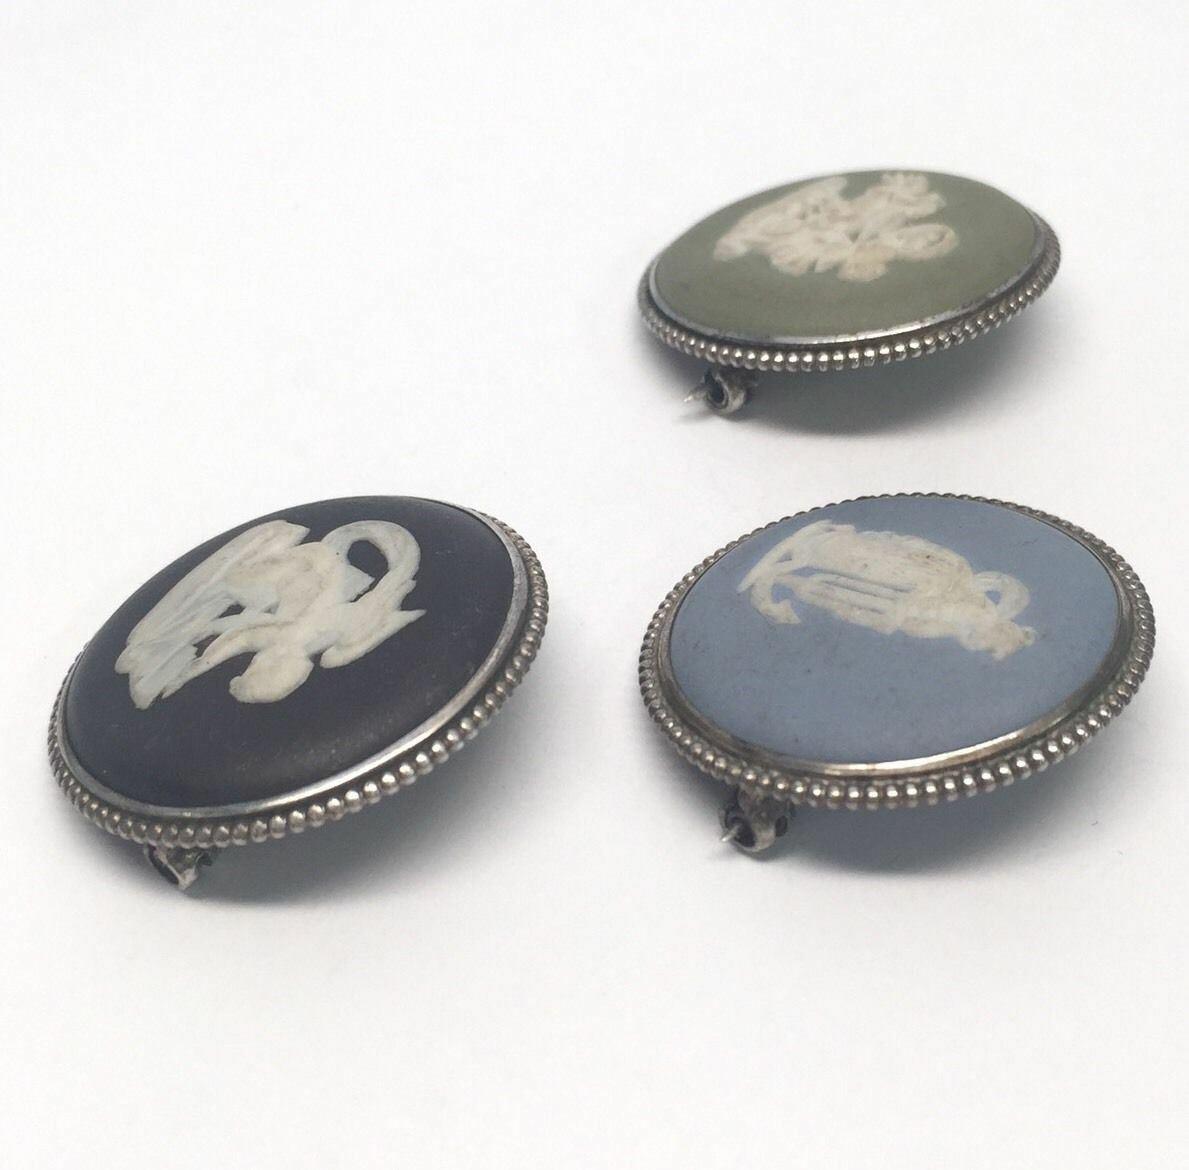 Lot of 3 Wedgwood cameo jasperware pins. Designs include black and white cherub/angel, blue and white woman, and green and white horse carriage and rider on cloud.

Marking:

Blue- WEDGWOOD MADE IN ENGLAND, 69W, SILVER FAW.

Green- WEDGWOOD MADE IN